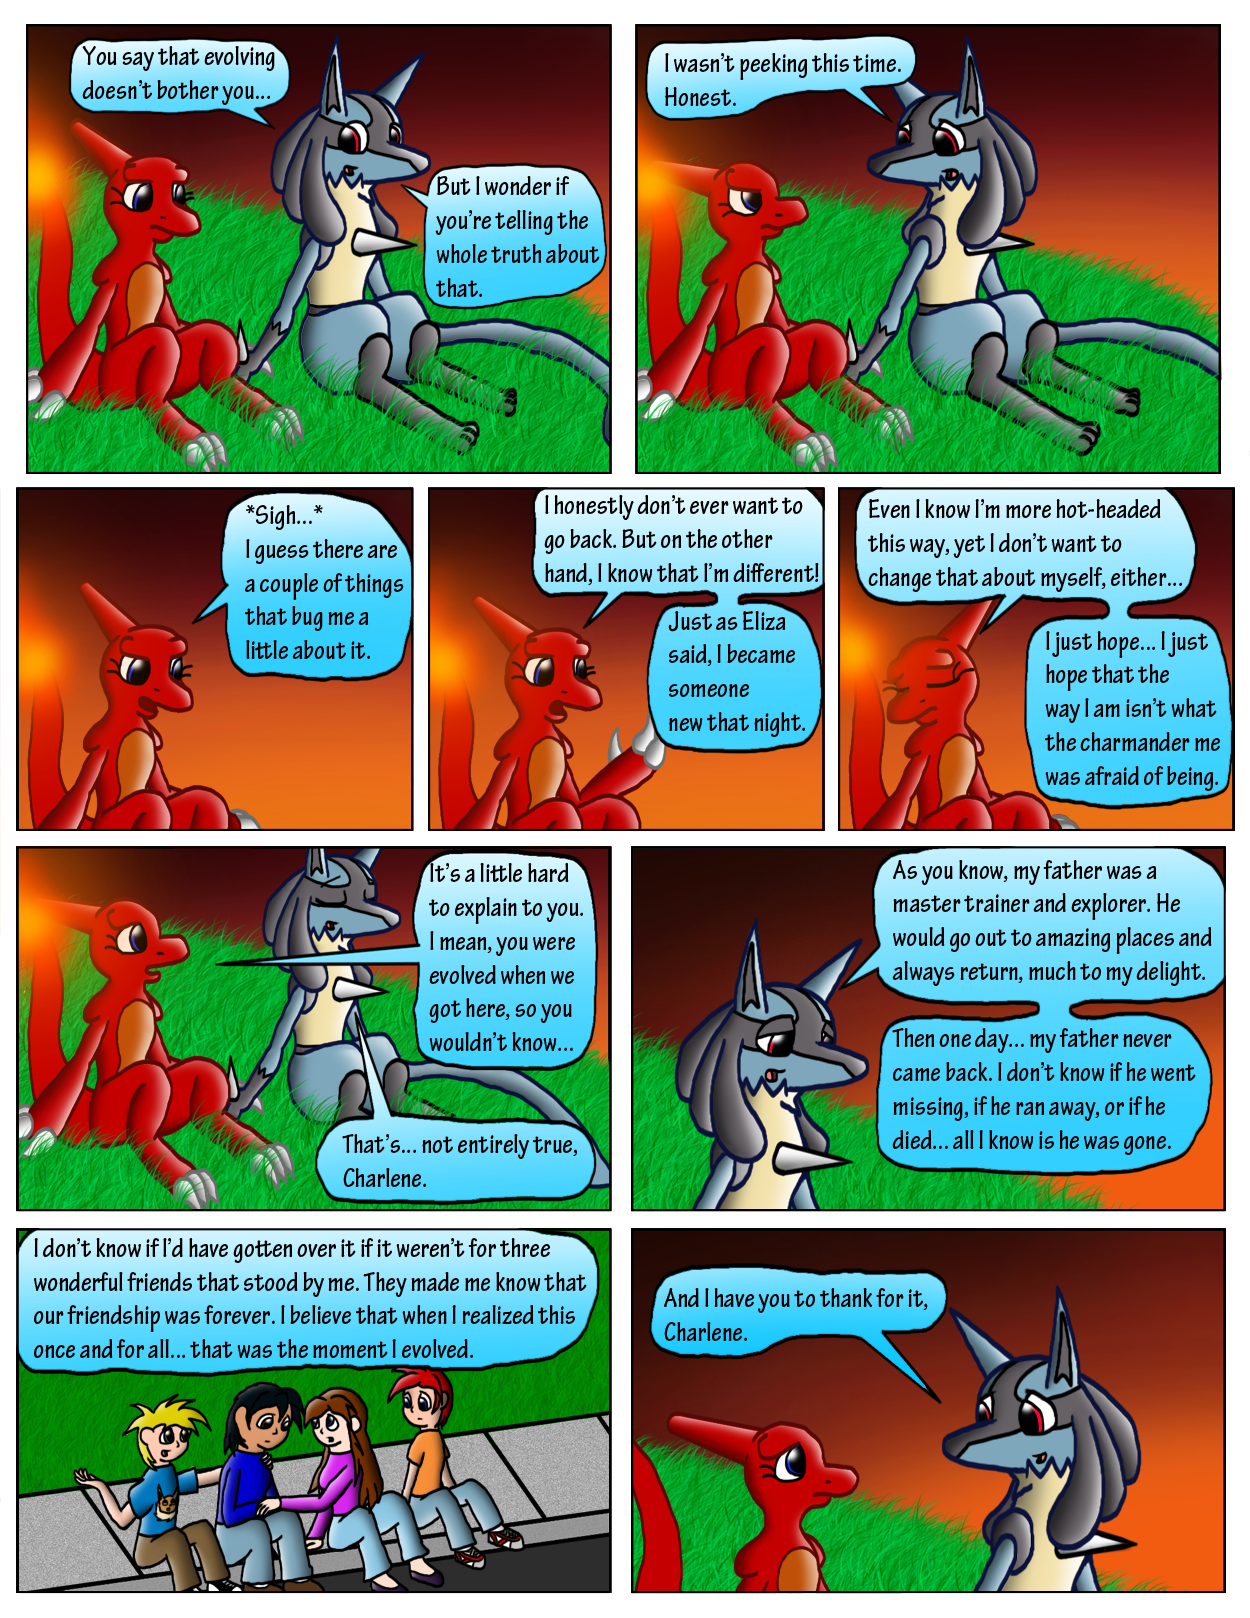 the_pokemorph_stories__page_42____conversation_by_ryusuta-d5r9wnd.png